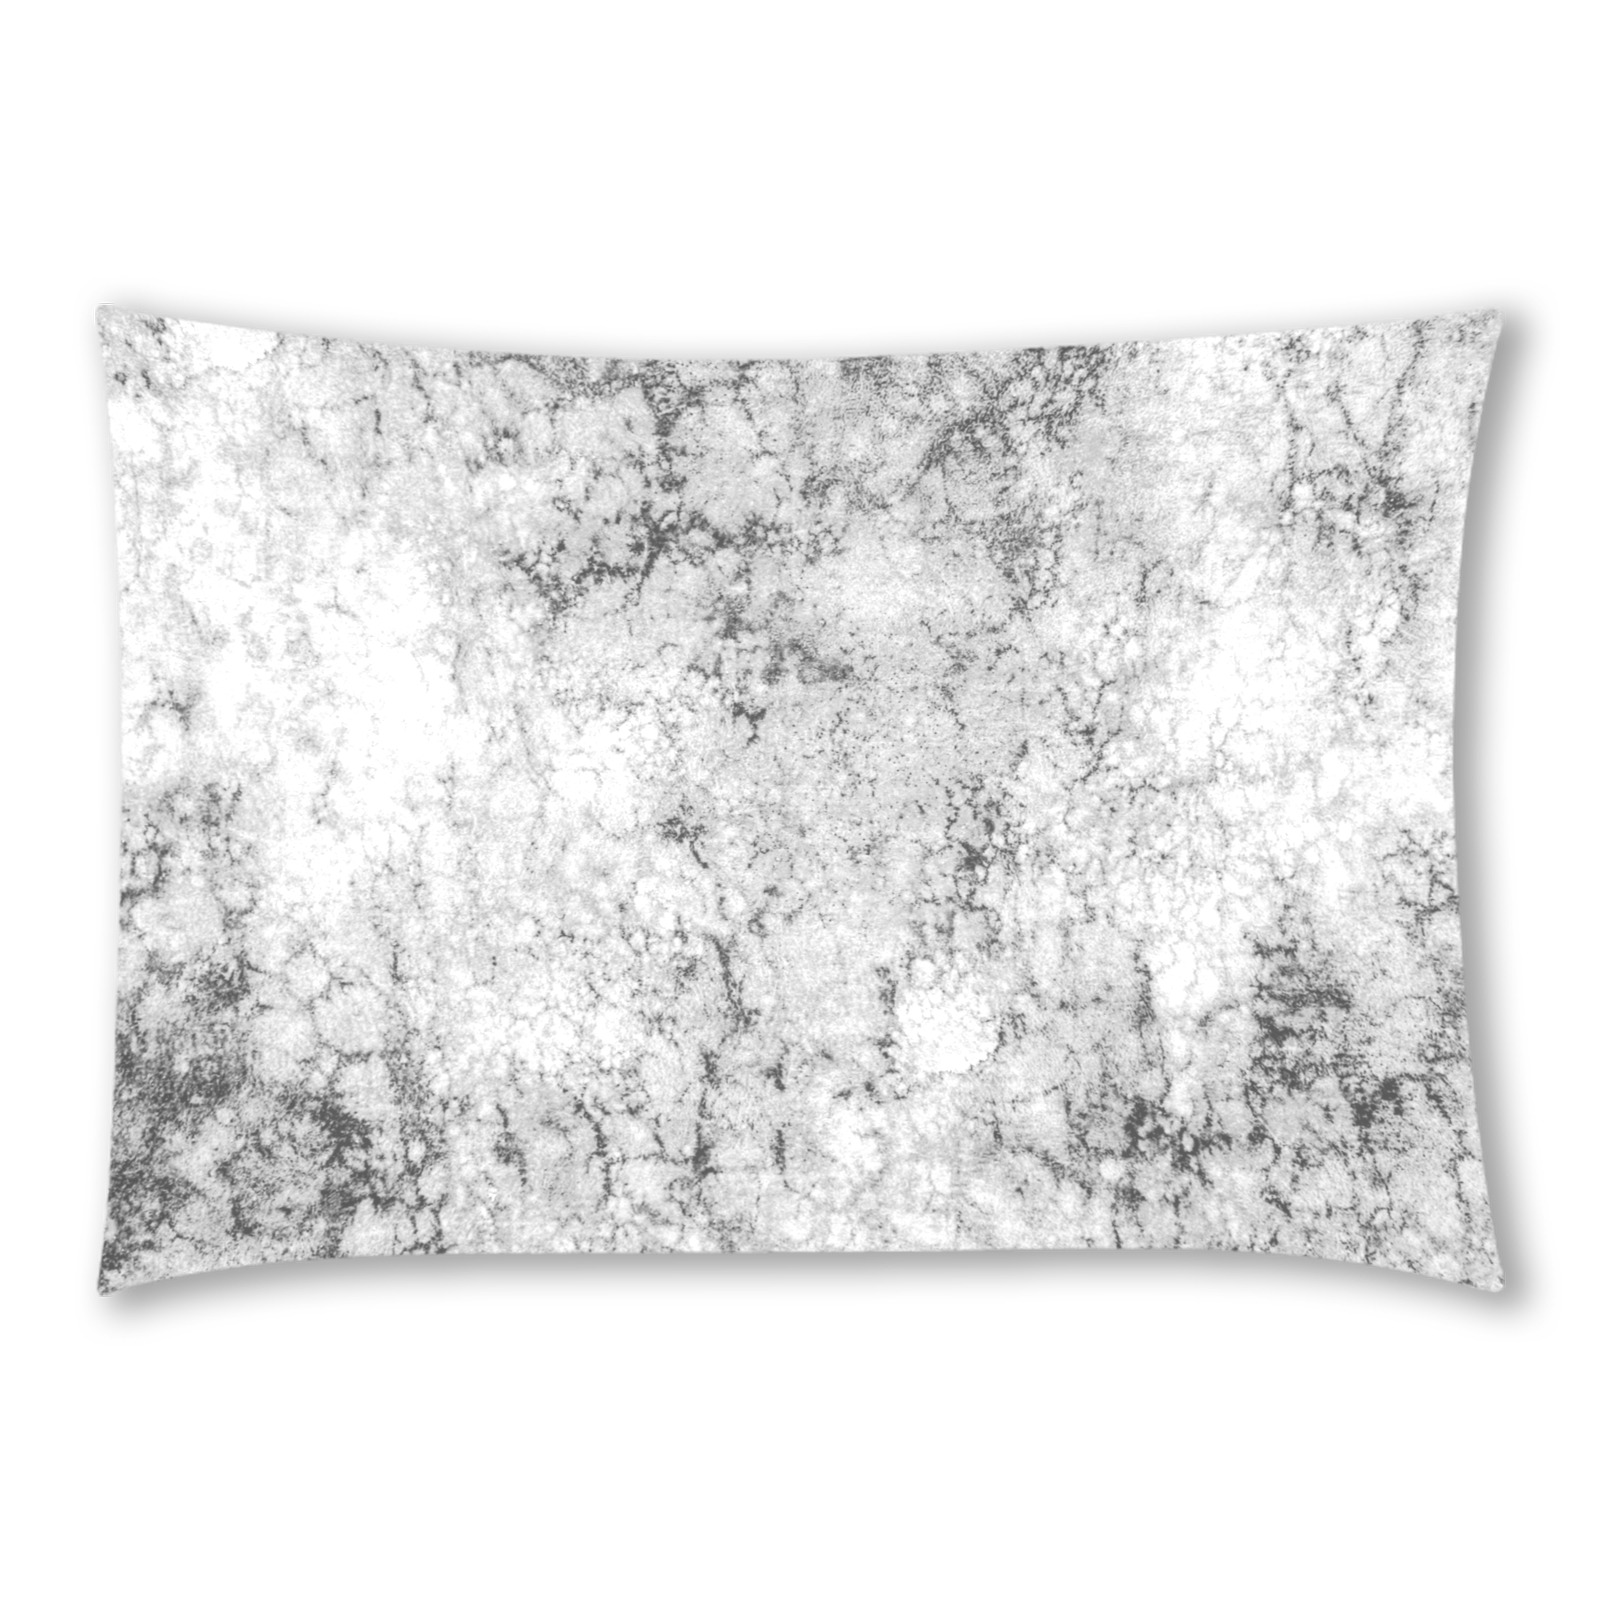 Textured gray Custom Rectangle Pillow Case 20x30 (One Side)